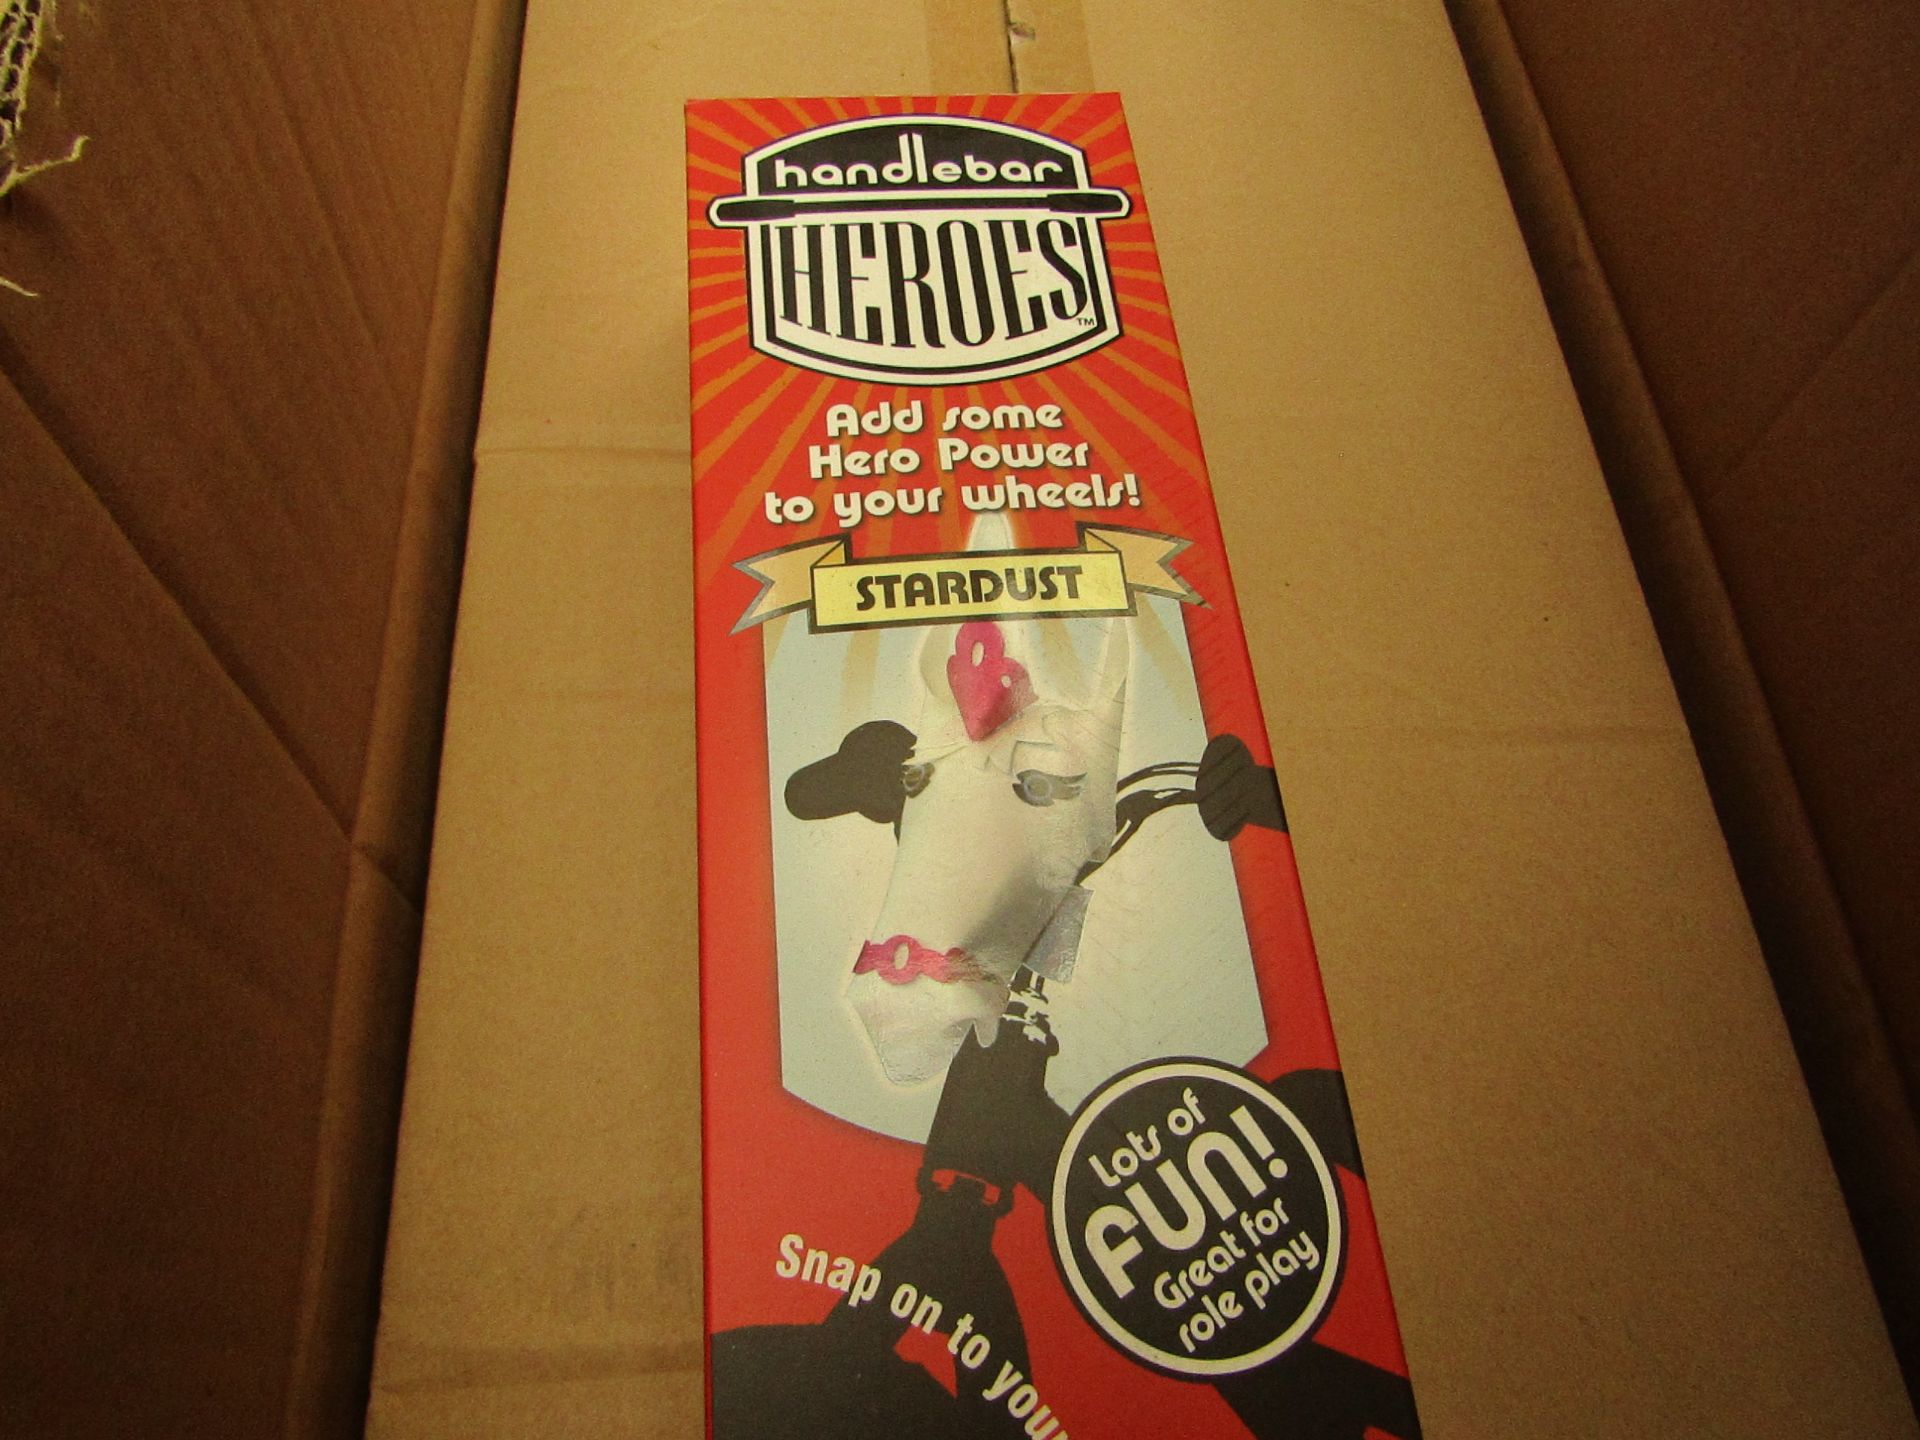 Handle Bar Heroes Stardust Bike/Scooter Accessory. New & Boxed.